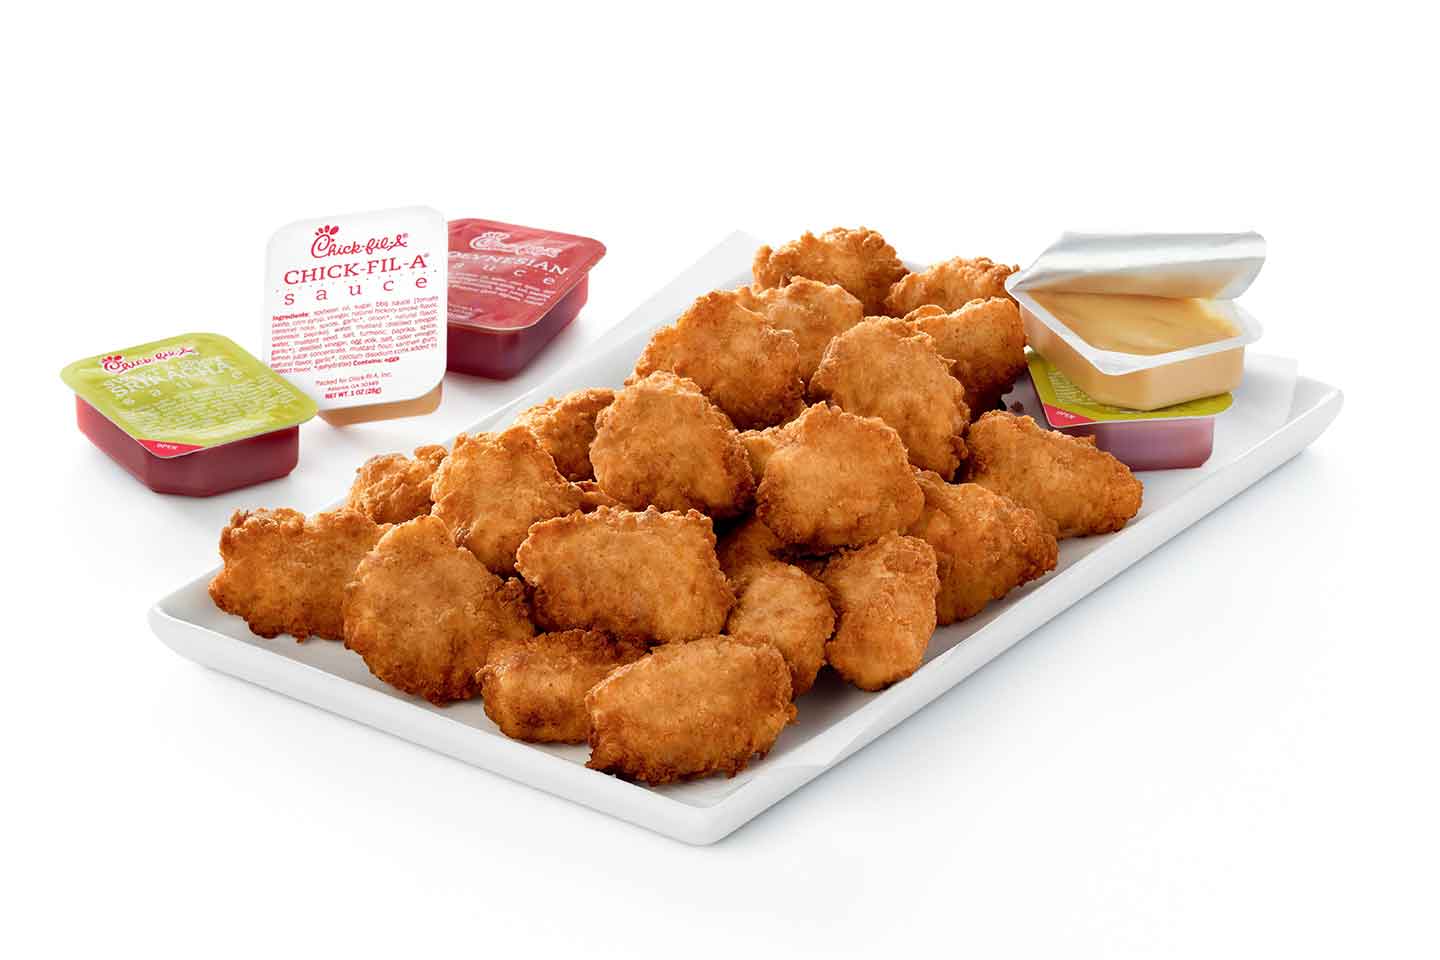 Chick-fil-A Has A Family-Style Meal That Includes Gallons Of Their